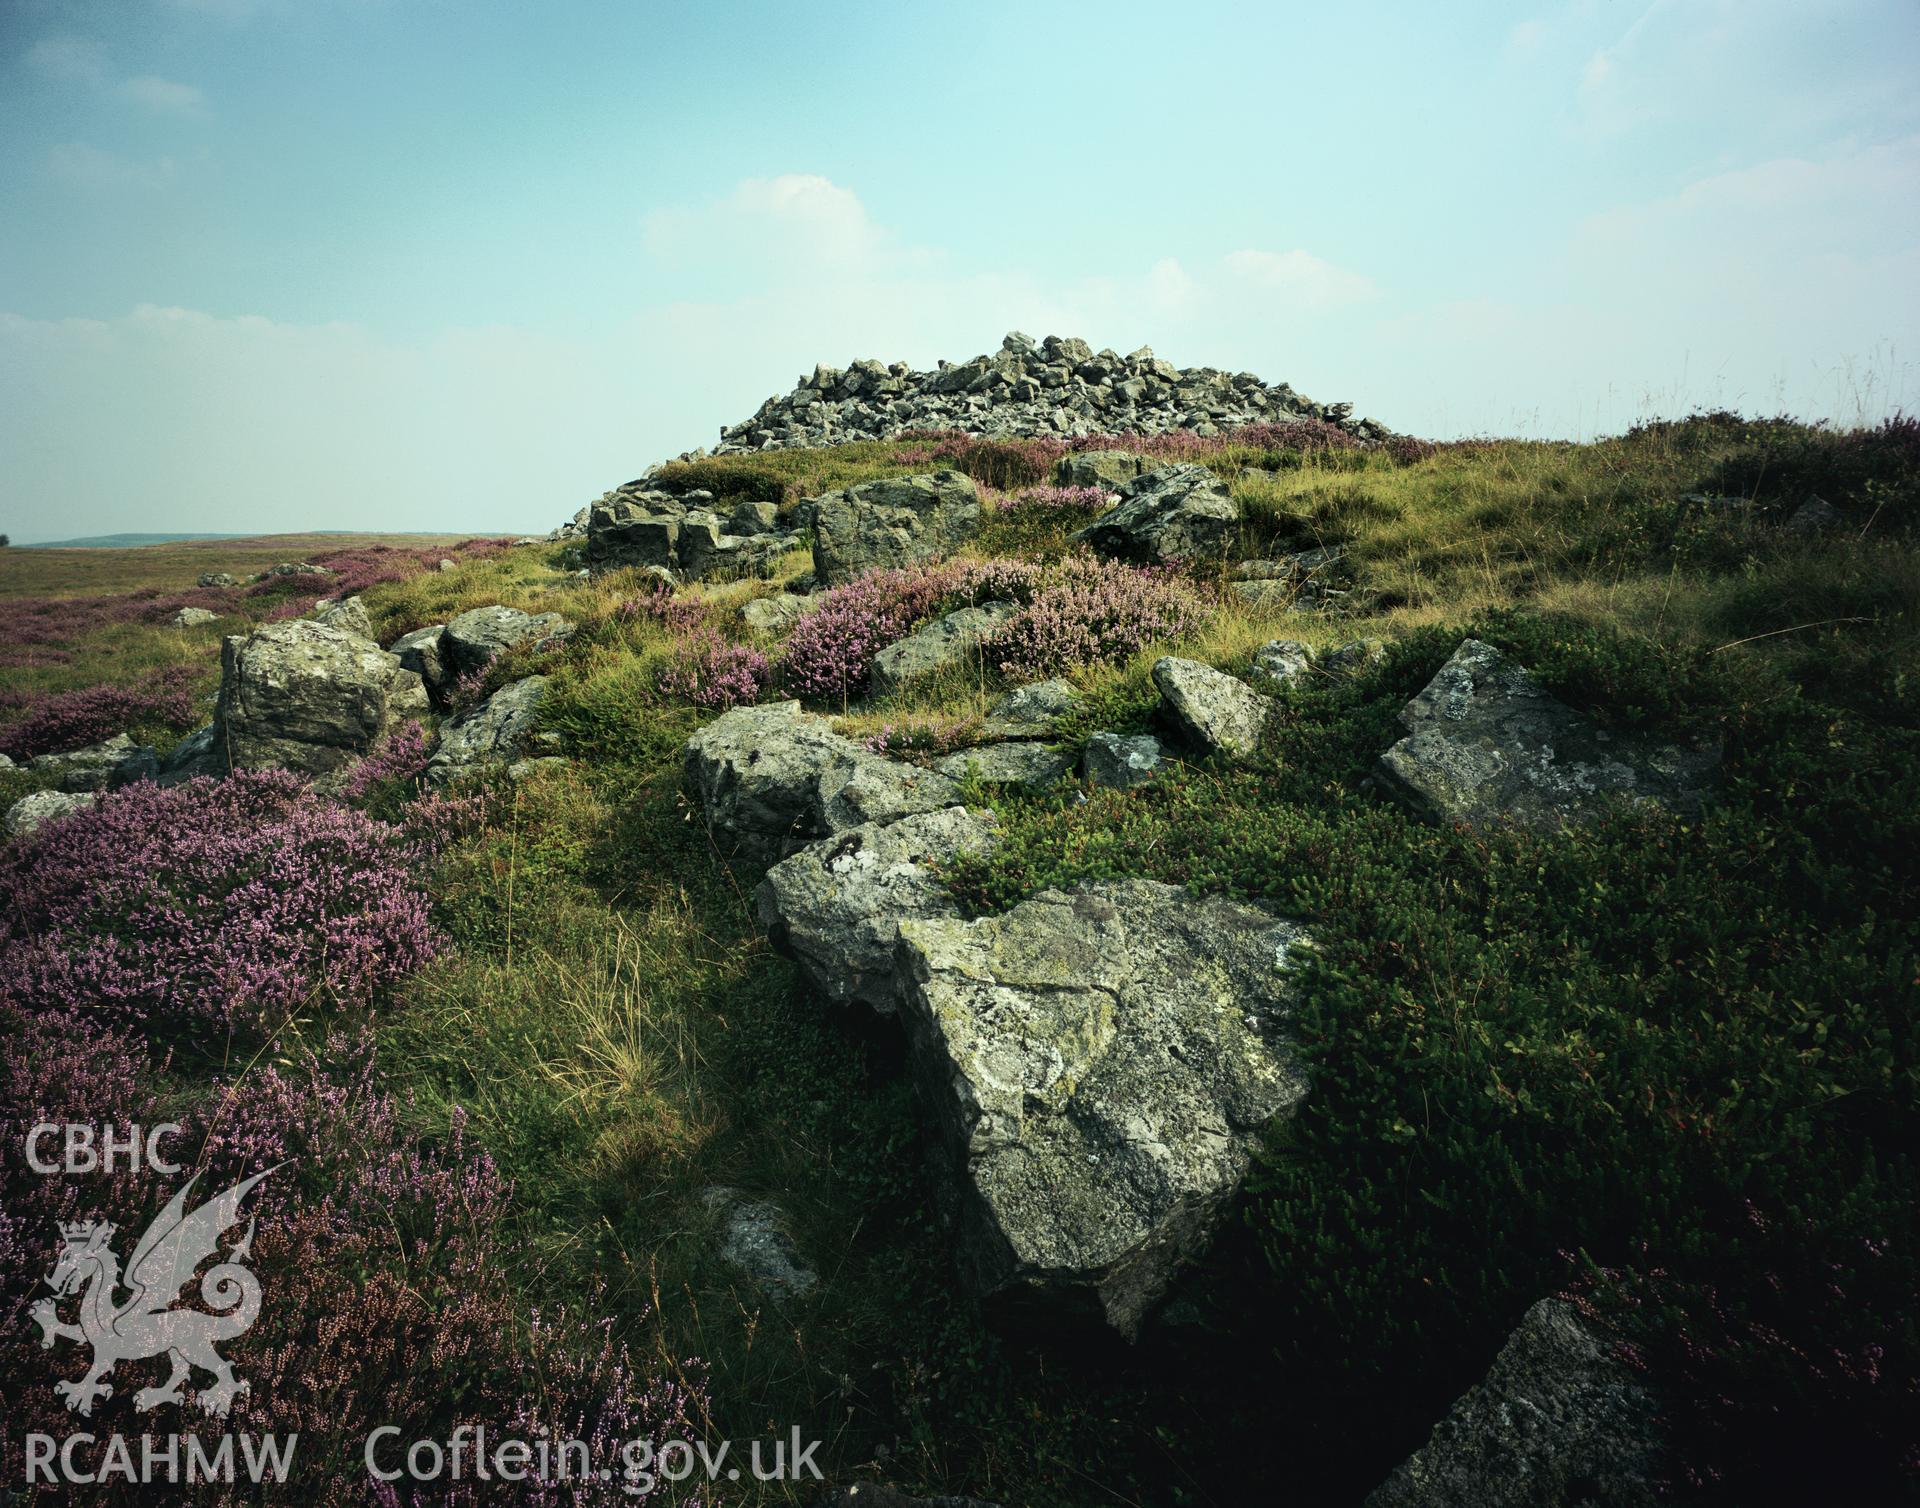 RCAHMW colour transparency showing cairn on the summit of Mynydd y Glug, taken by RCAHMW 1981